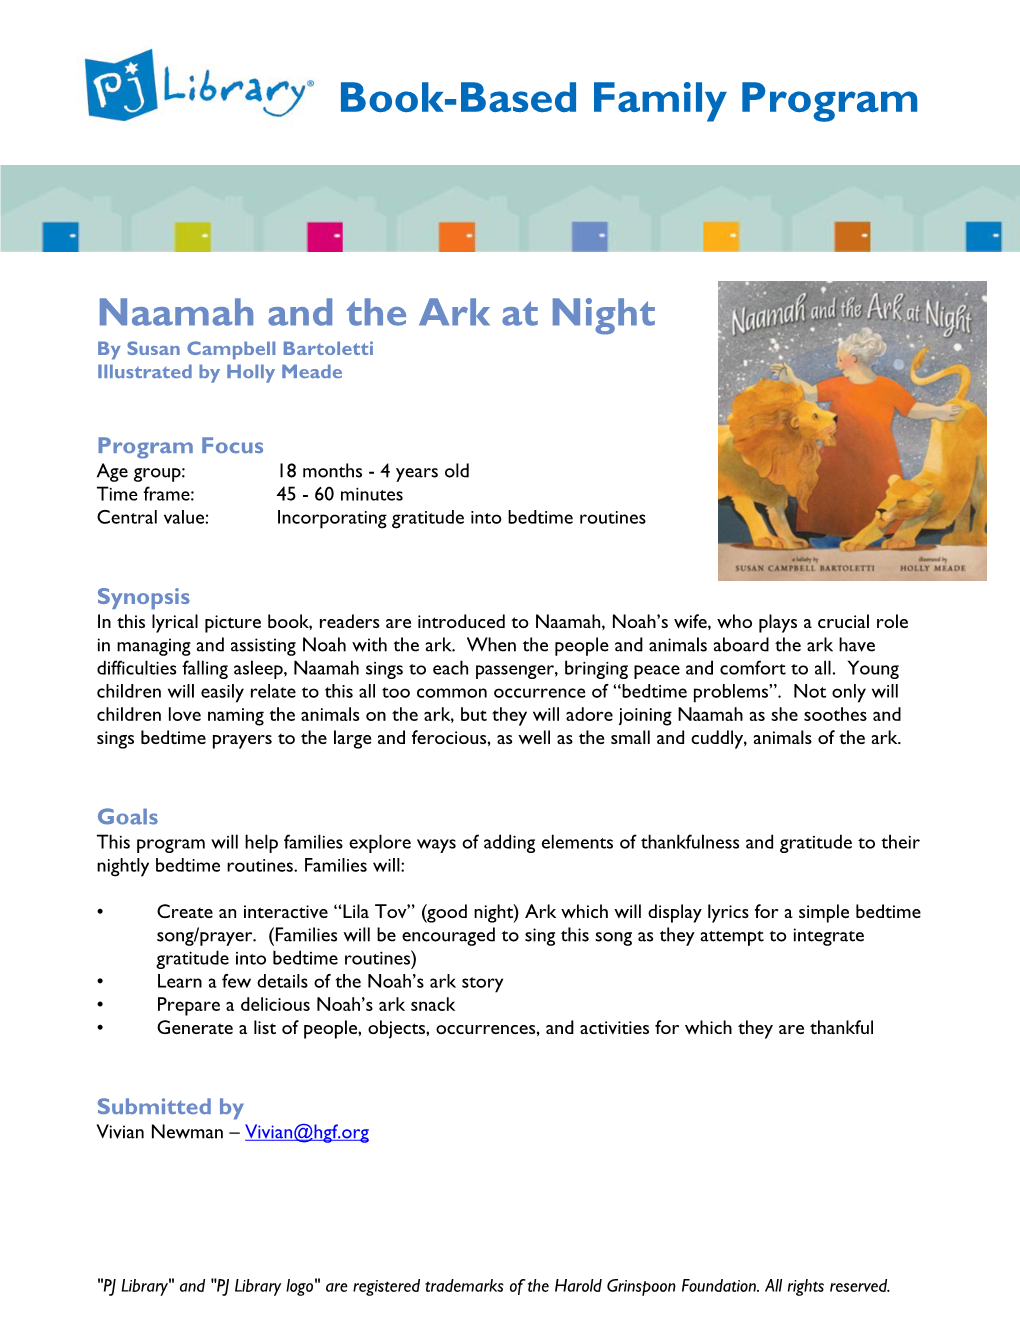 Naamah and the Ark at Night by Susan Campbell Bartoletti Illustrated by Holly Meade